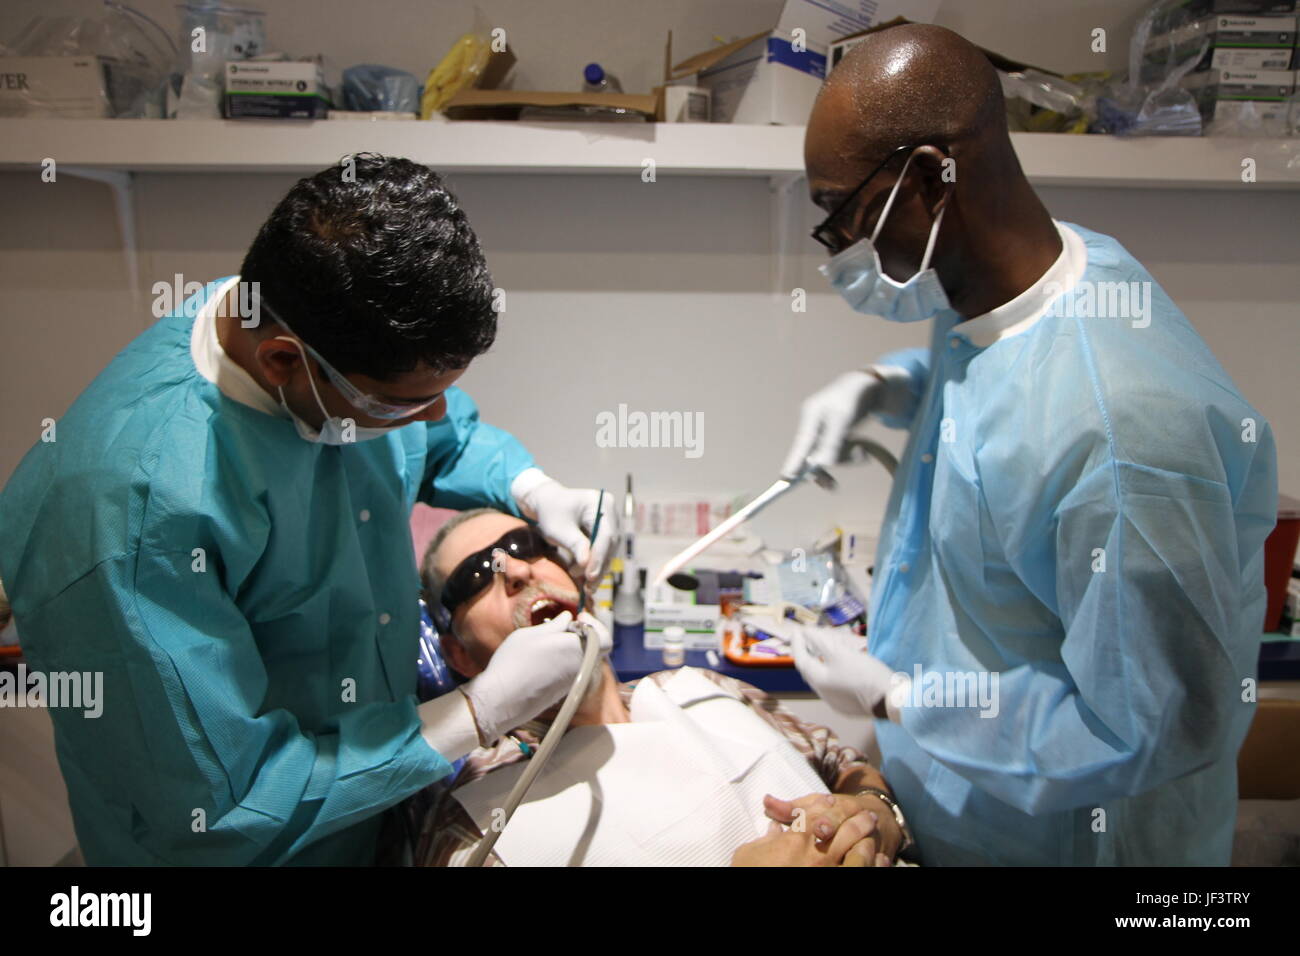 Capt. Aswini Jagadeesh and Spc. Yawotse Noumedor from the 455th Dental Company in Devens Reserve Forces Training Area, Mass. conduct a dental procedure during Appalachia IRT 2017 which took place from May 14-27 at the Wise County Fairgrounds in Wise, Va. Stock Photo